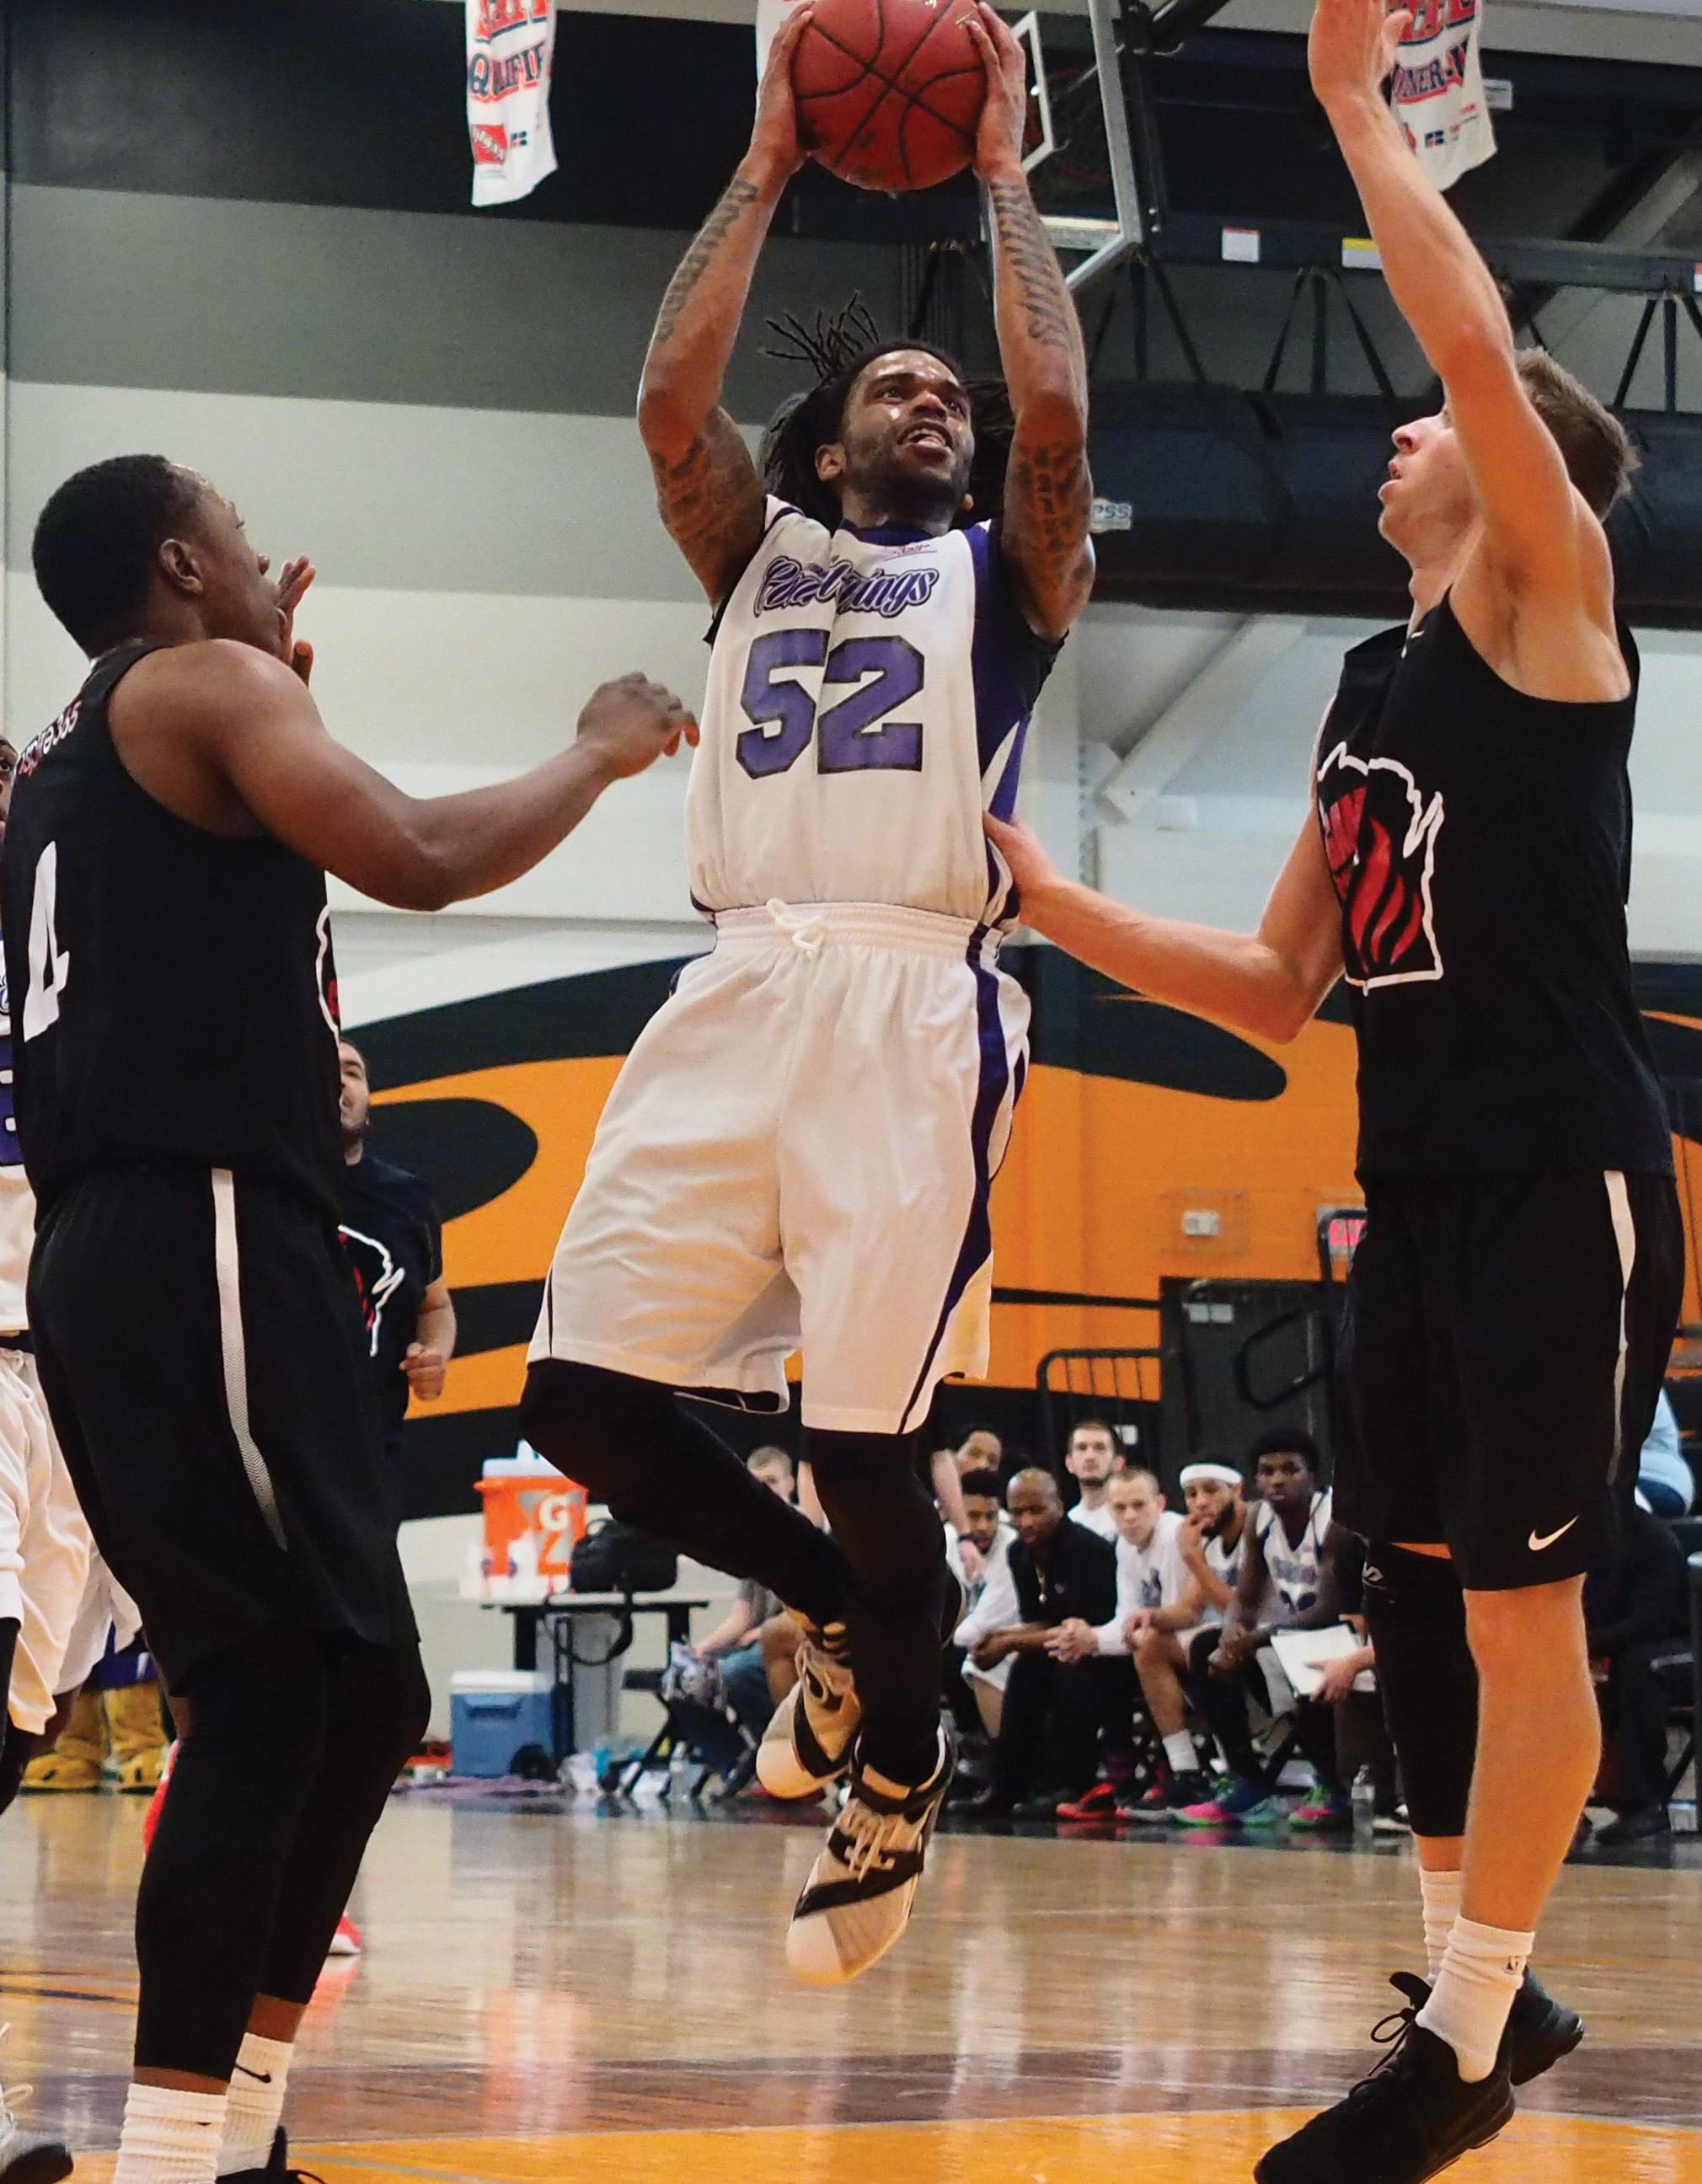 Defending MBL champs CourtKings put on an ‘exhibition’ at new CC gym